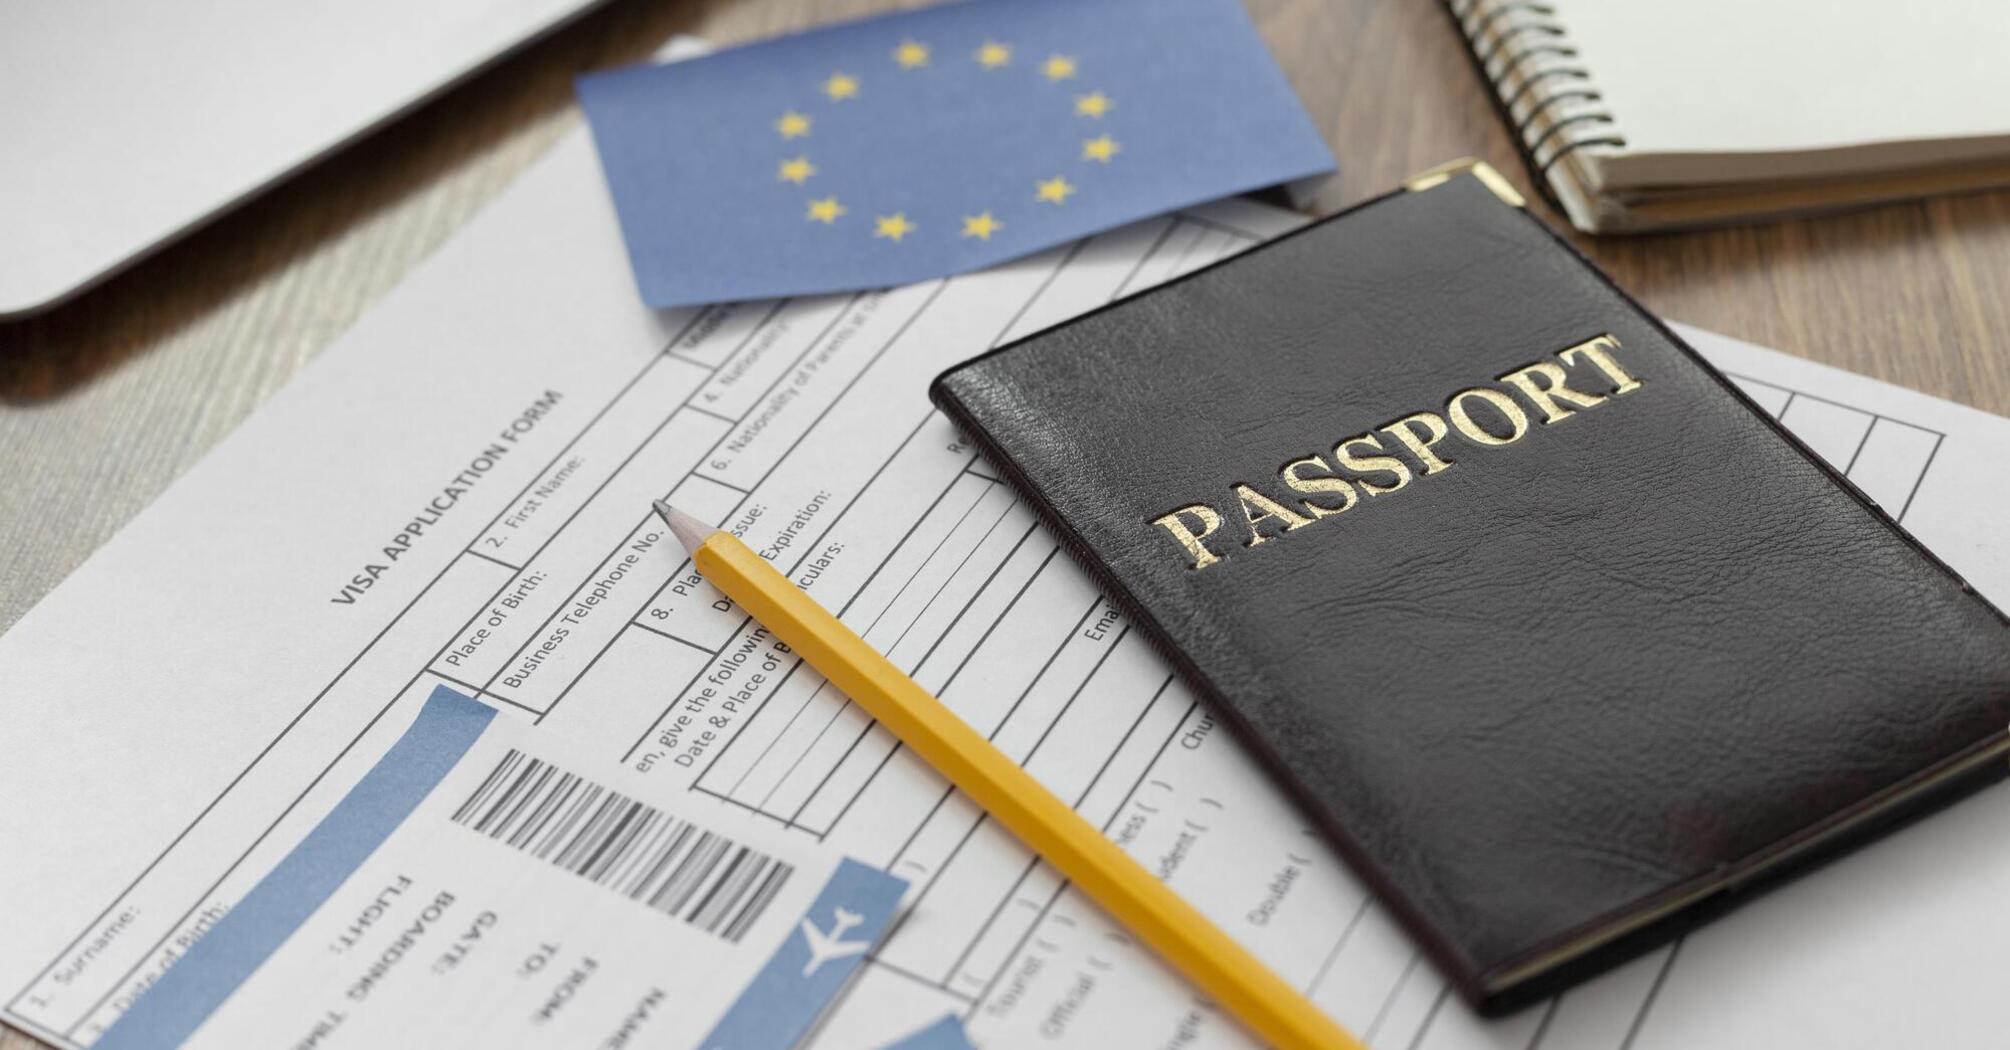 Permanent residence in Europe: what you need to know about rights and restrictions